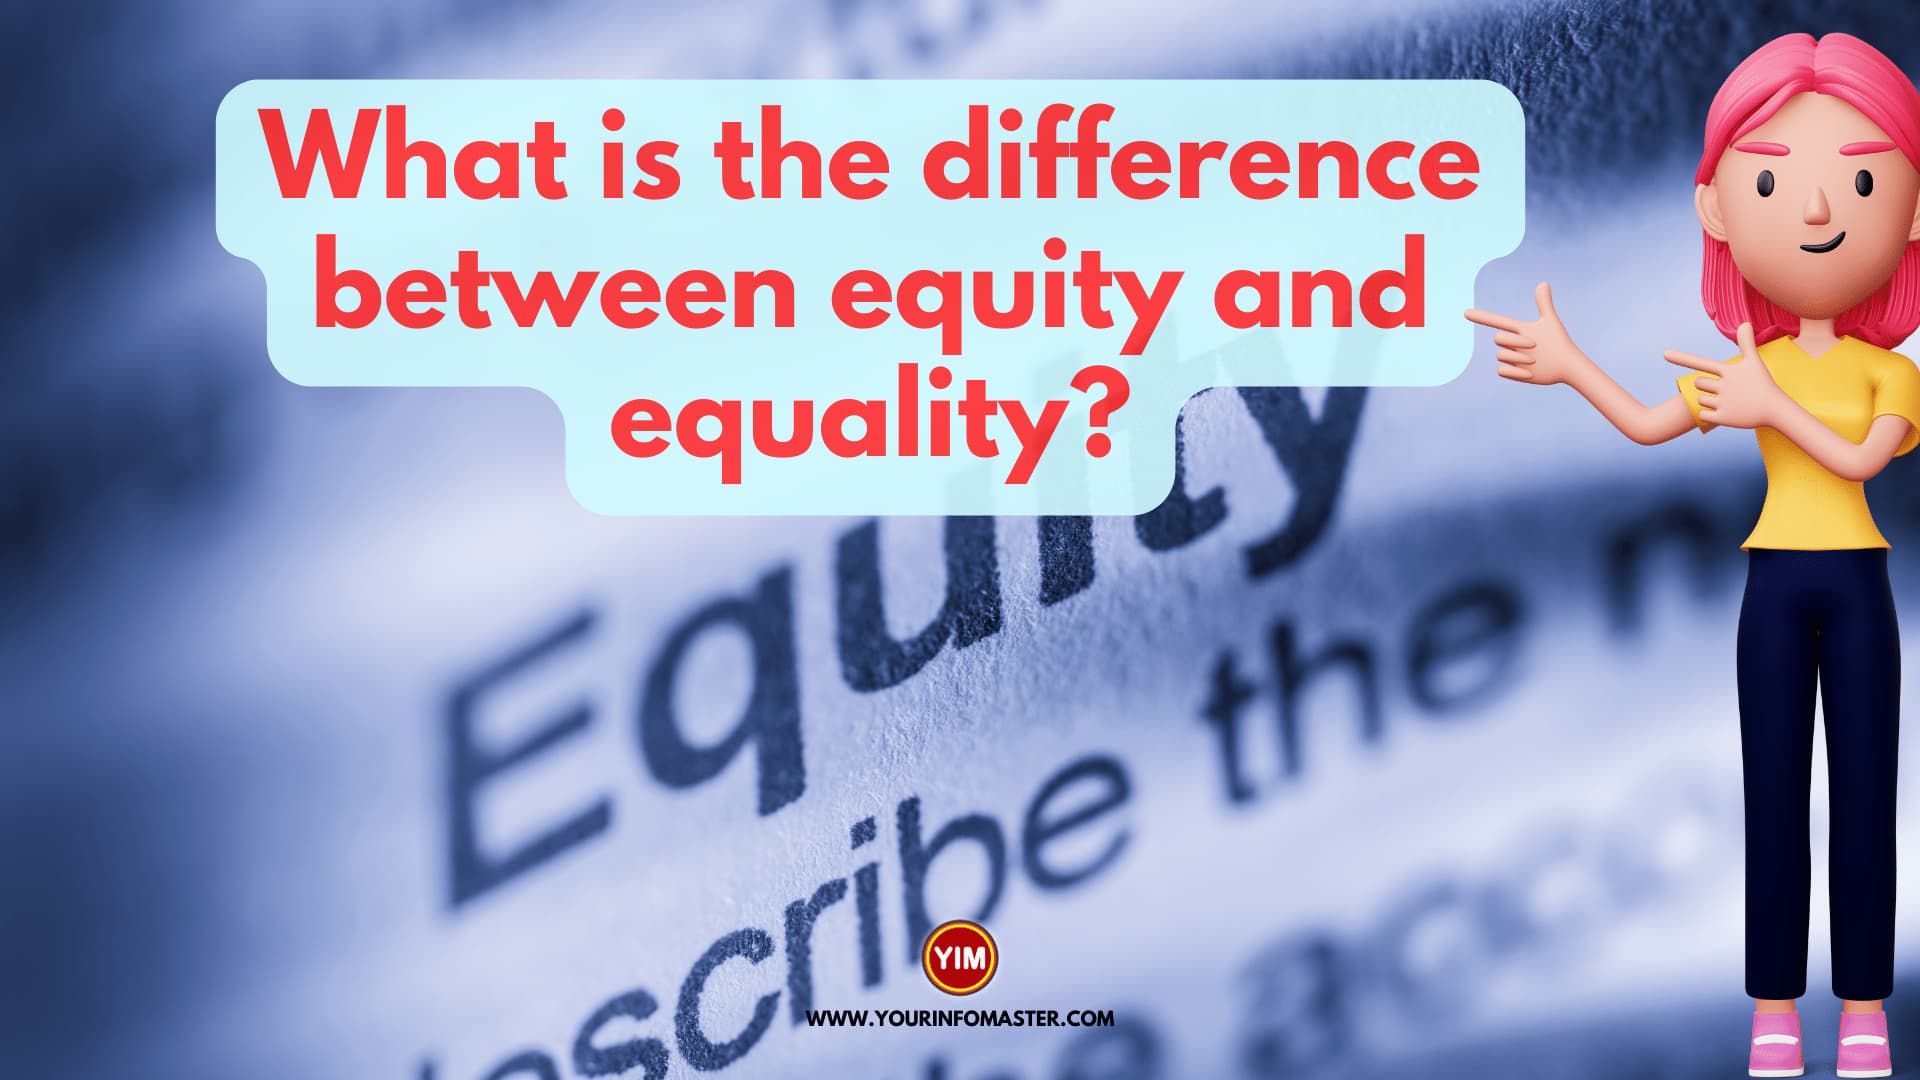 What is the difference between equity and equality